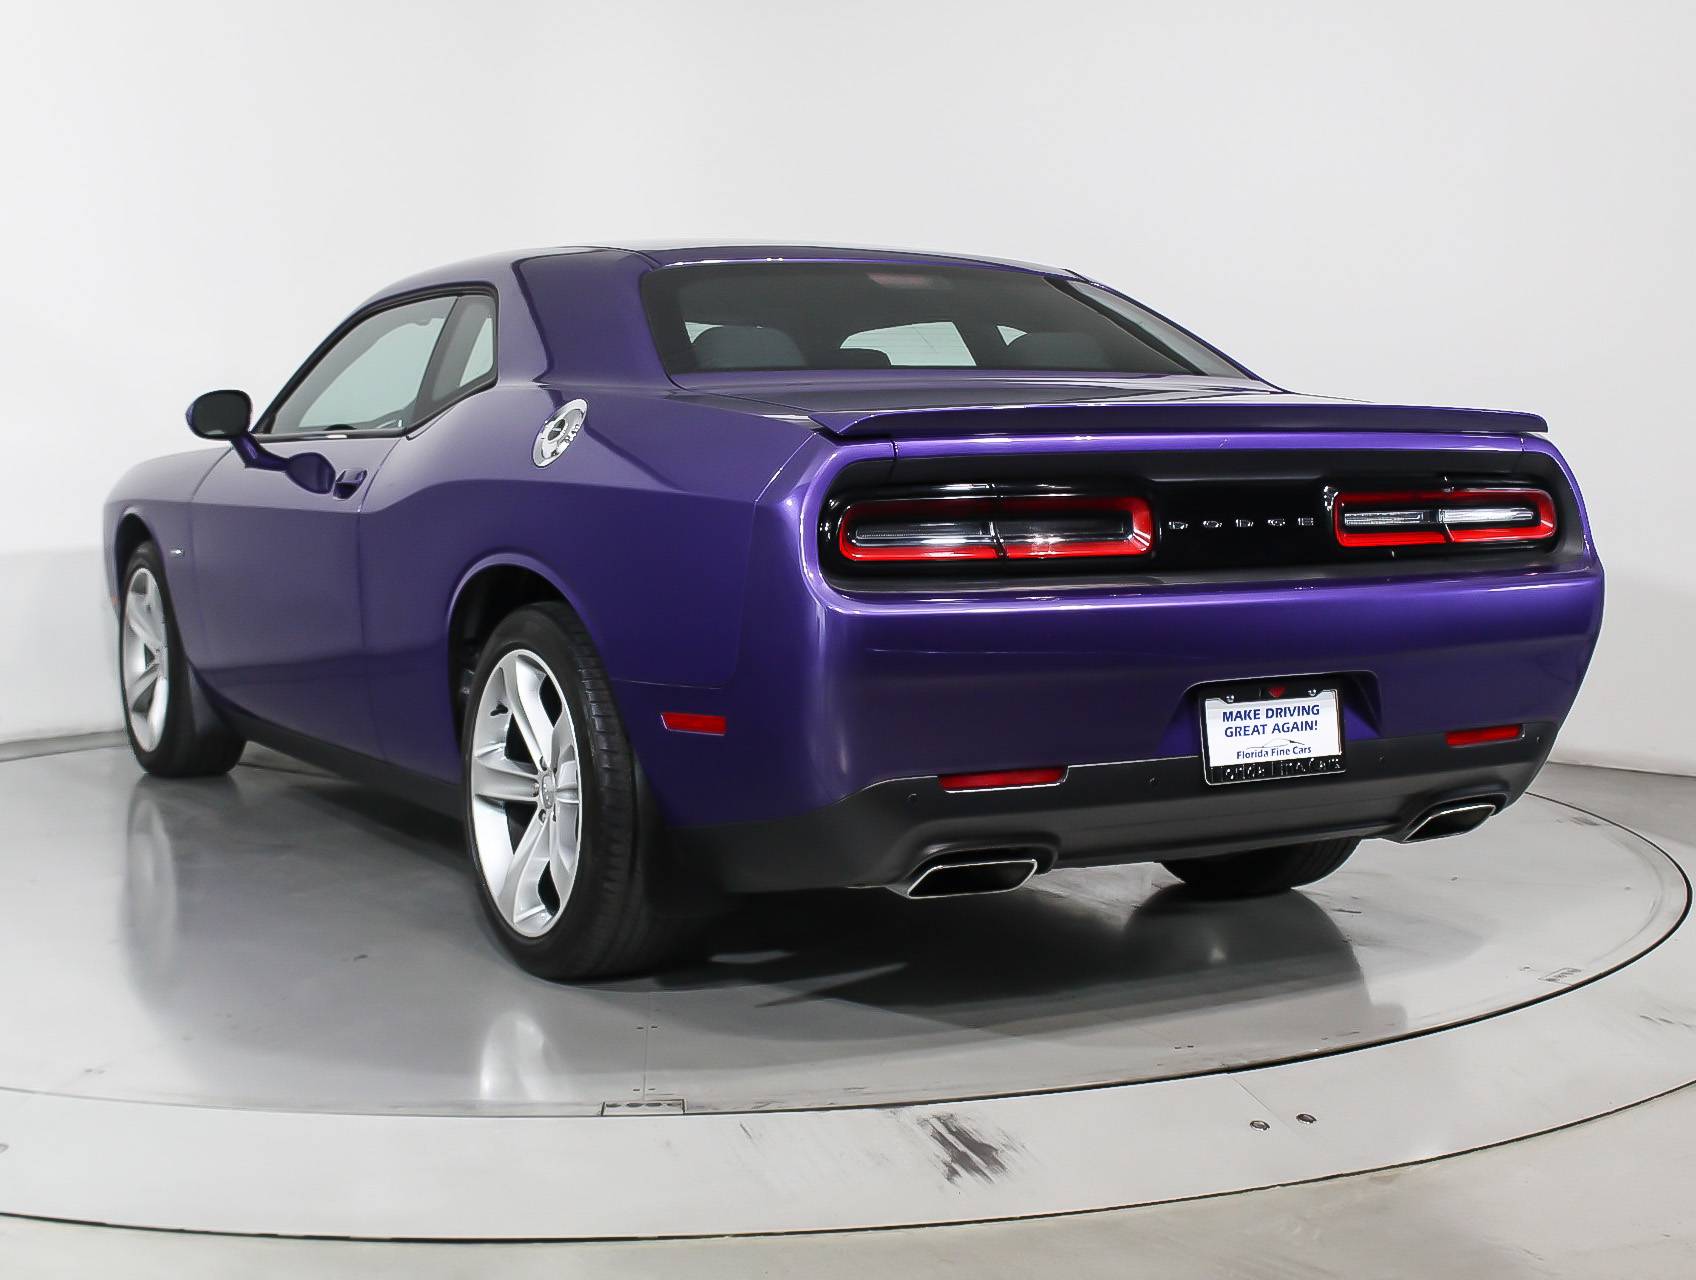 Florida Fine Cars - Used DODGE CHALLENGER 2016 MIAMI R/t 6 Speed Manual 